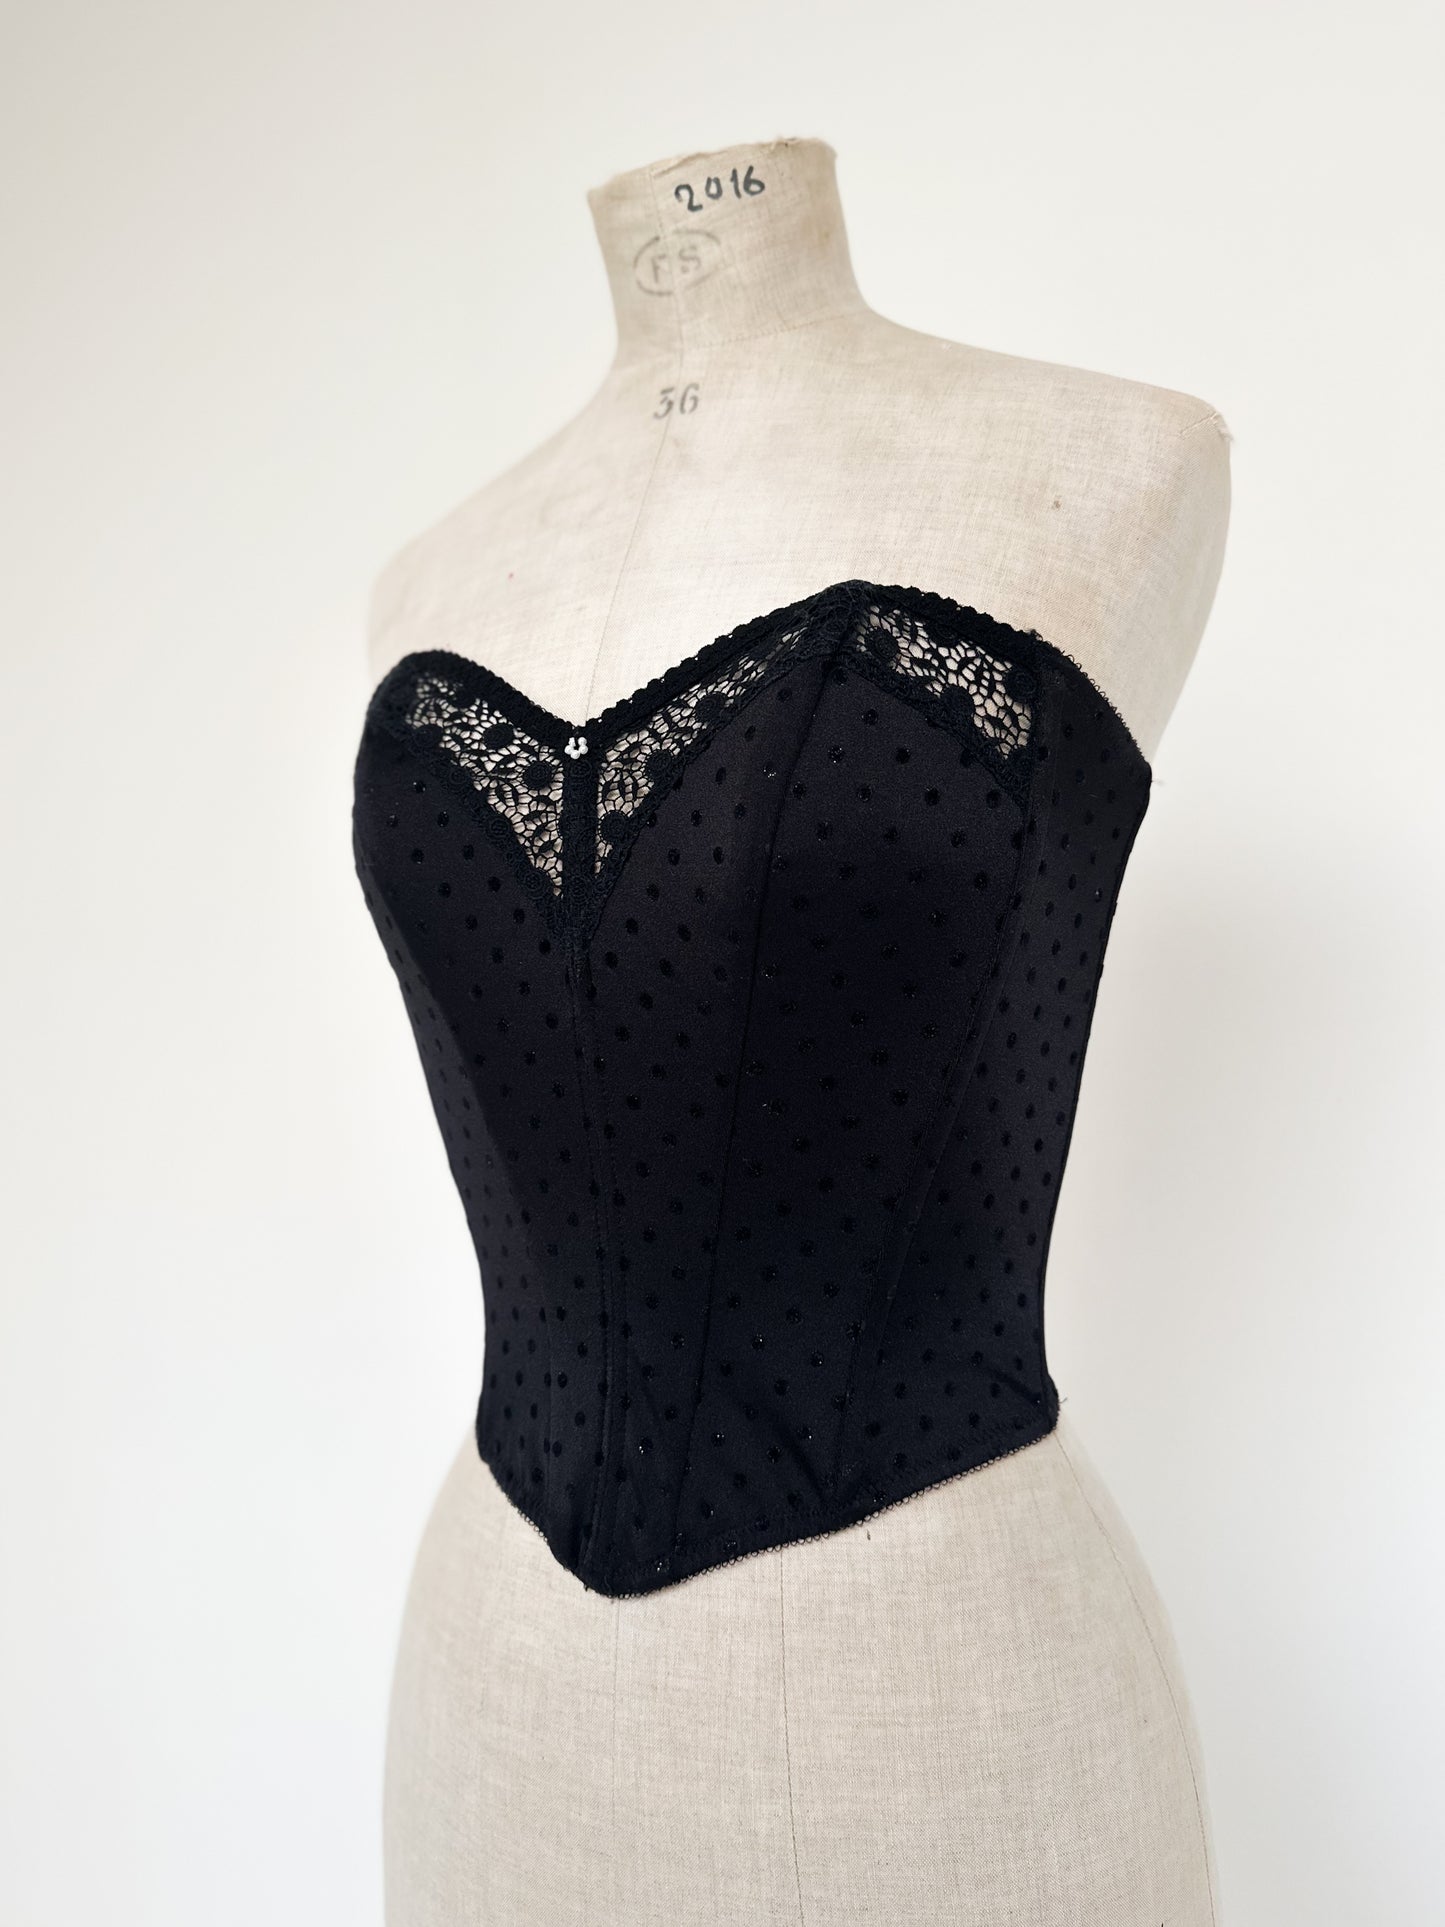 CLASSIC BLACK SHIMMER BUSTIER (XS - S)